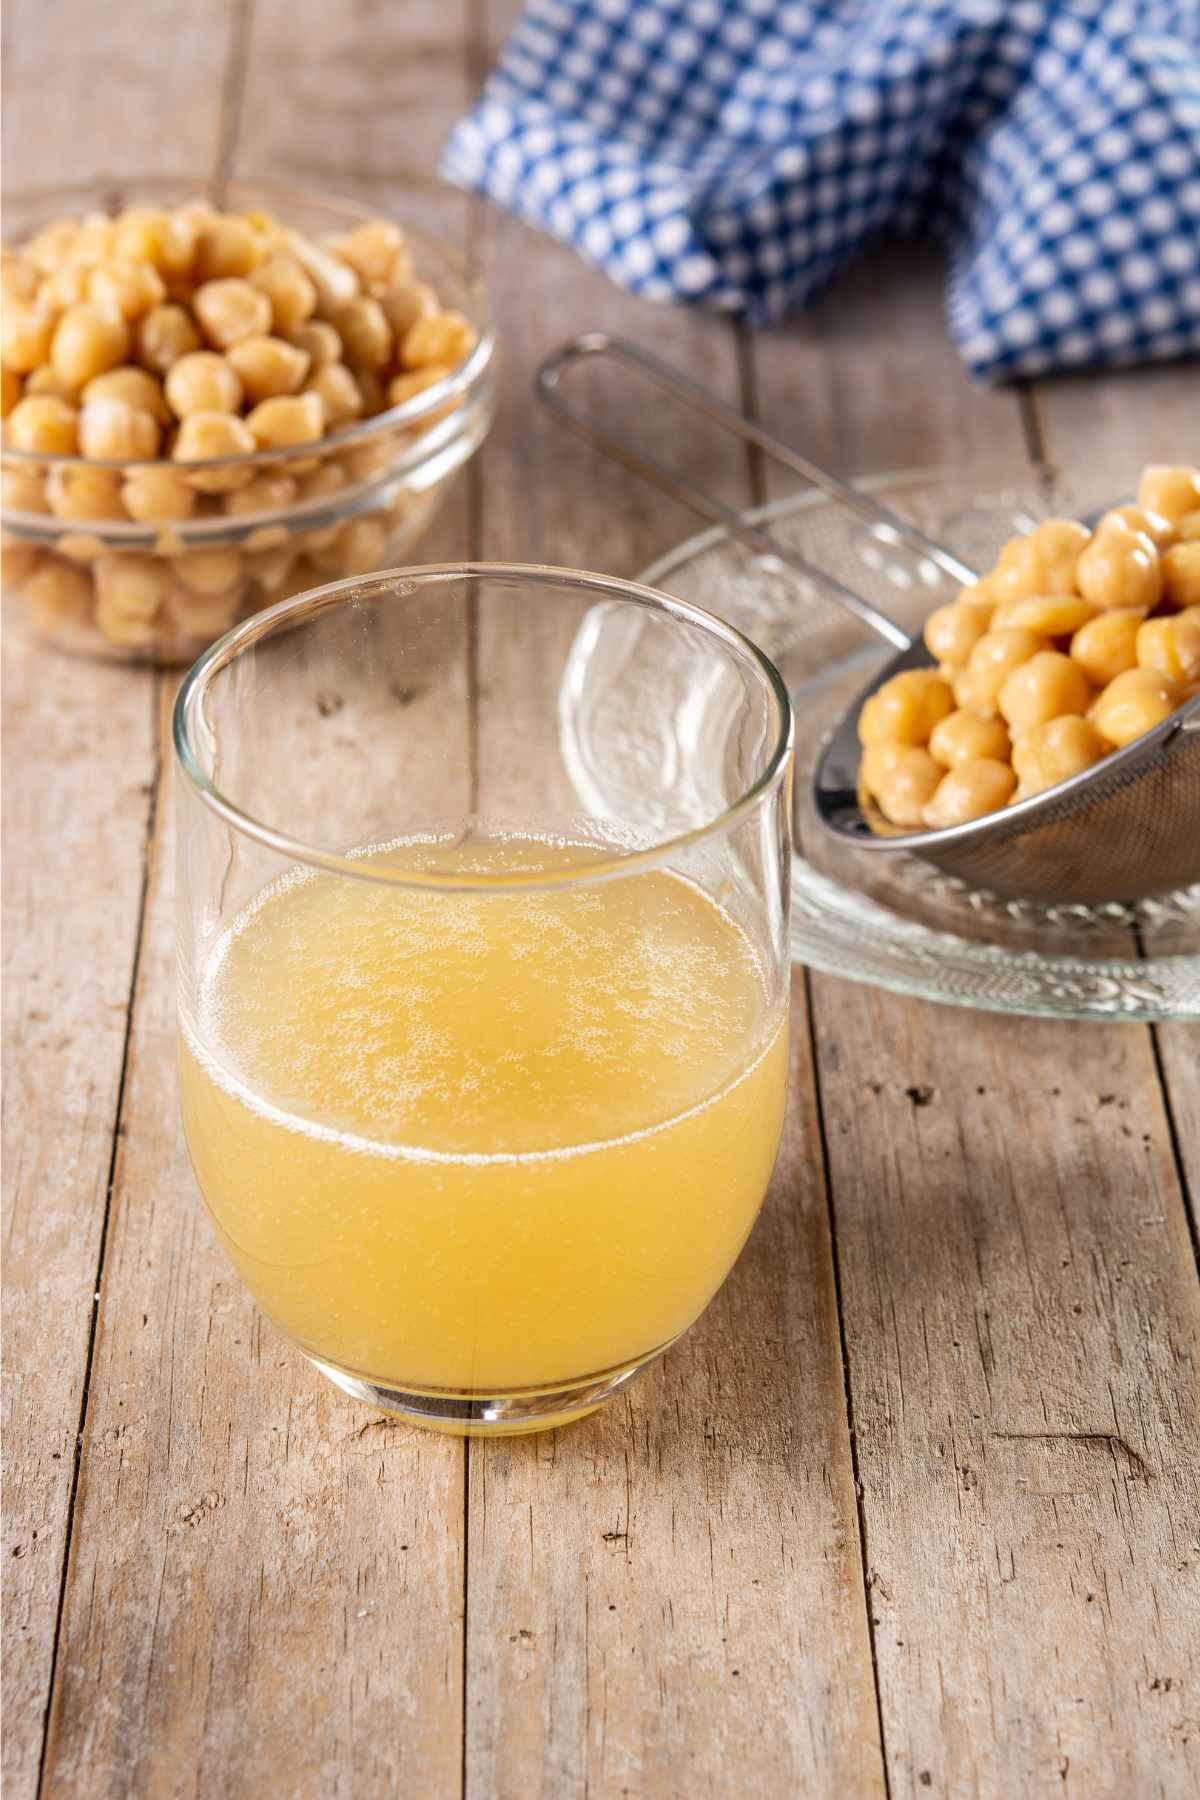 aquafaba from canned chickpeas